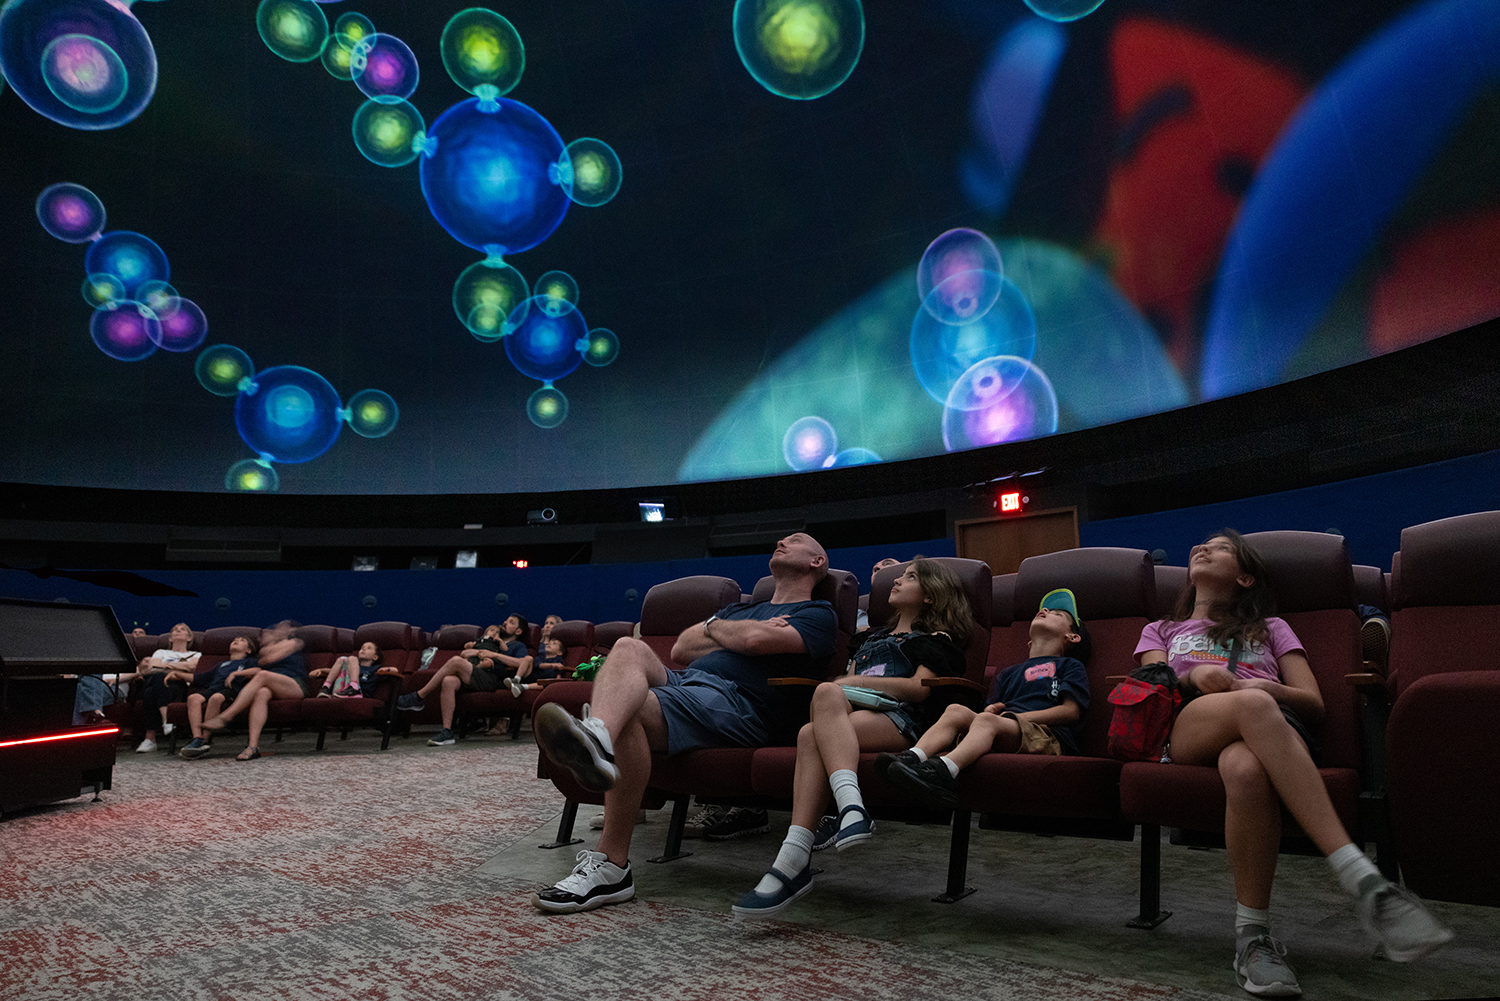 People look up at the ceiling at the Morehead Planetarium.